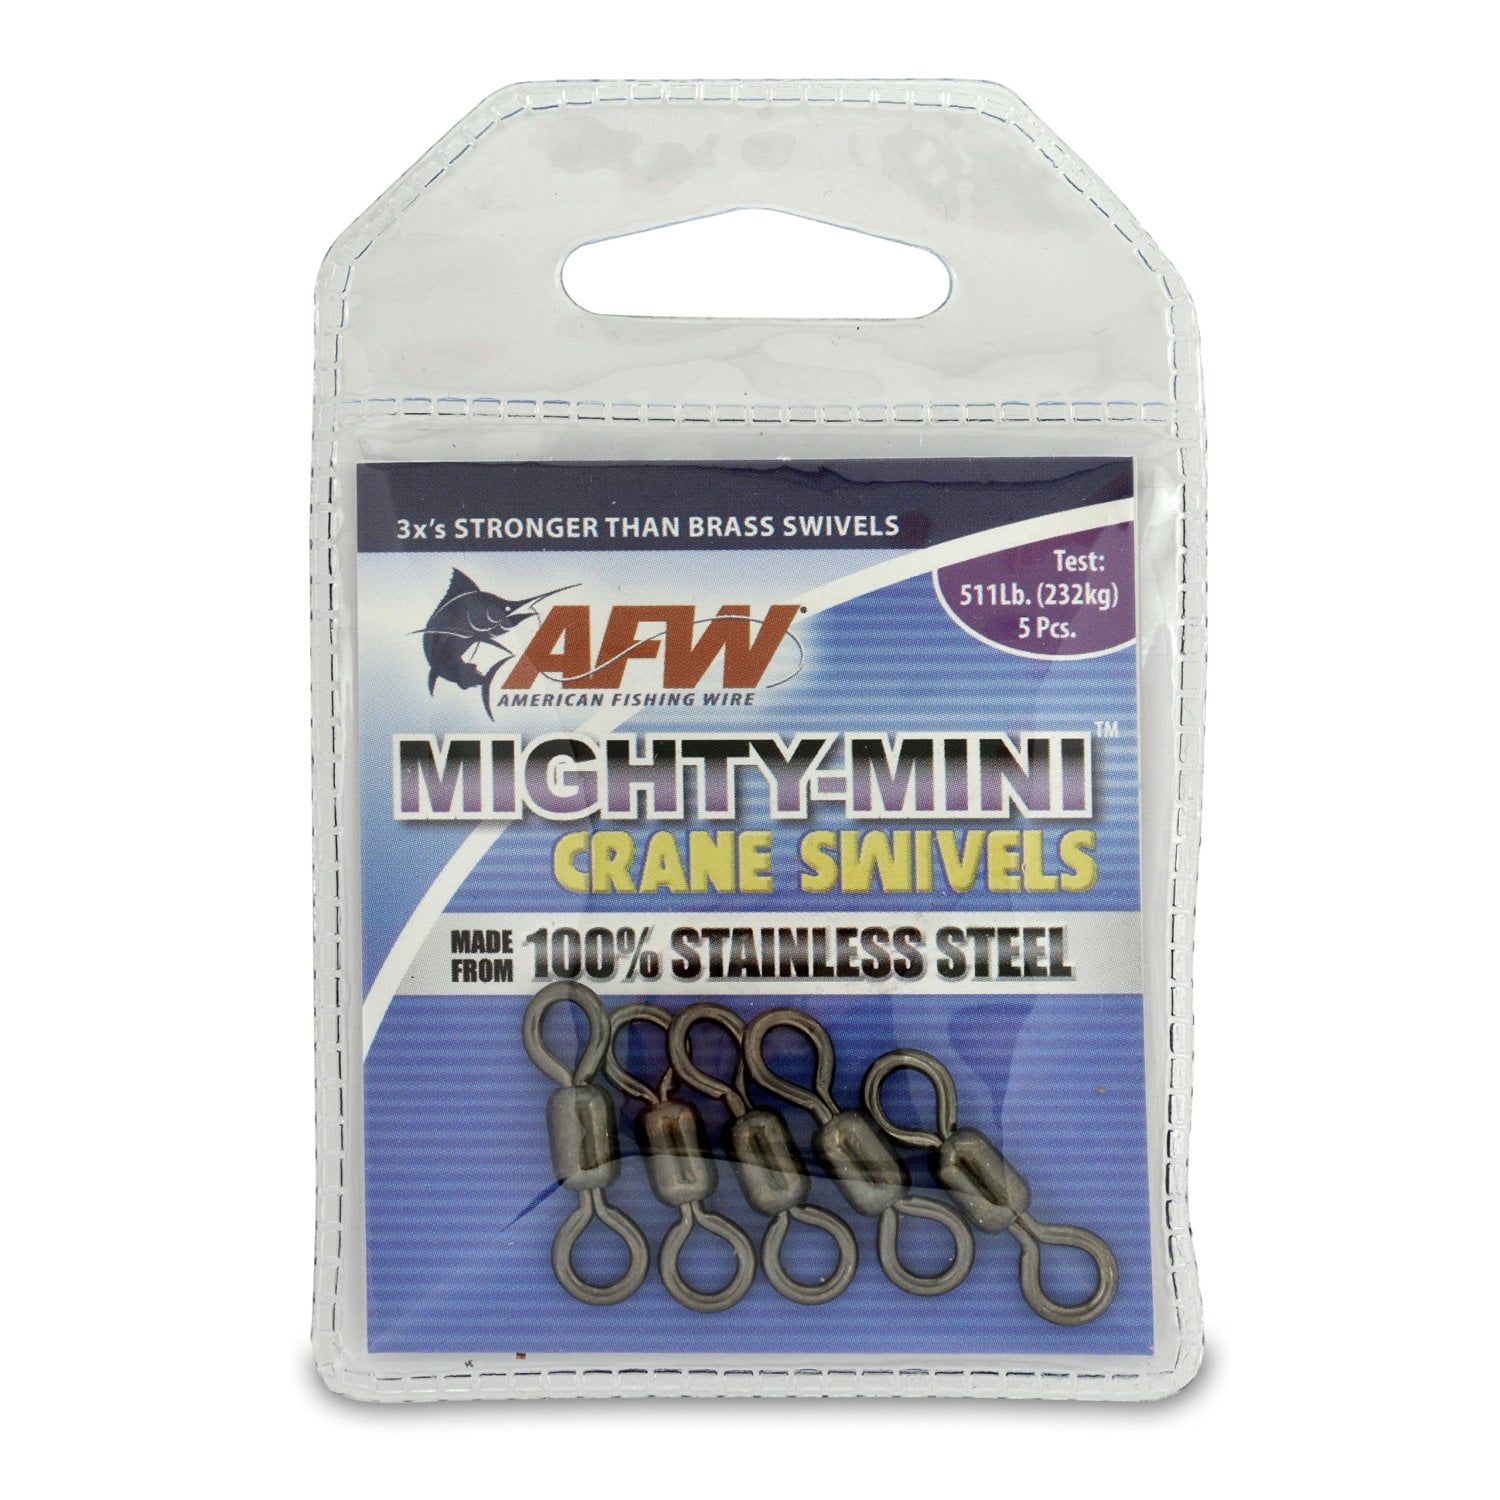 American Fishing Wire Mighty Mini Crane Swivels (100-Percent Stainless  Steel), Black Color, Size 10, 